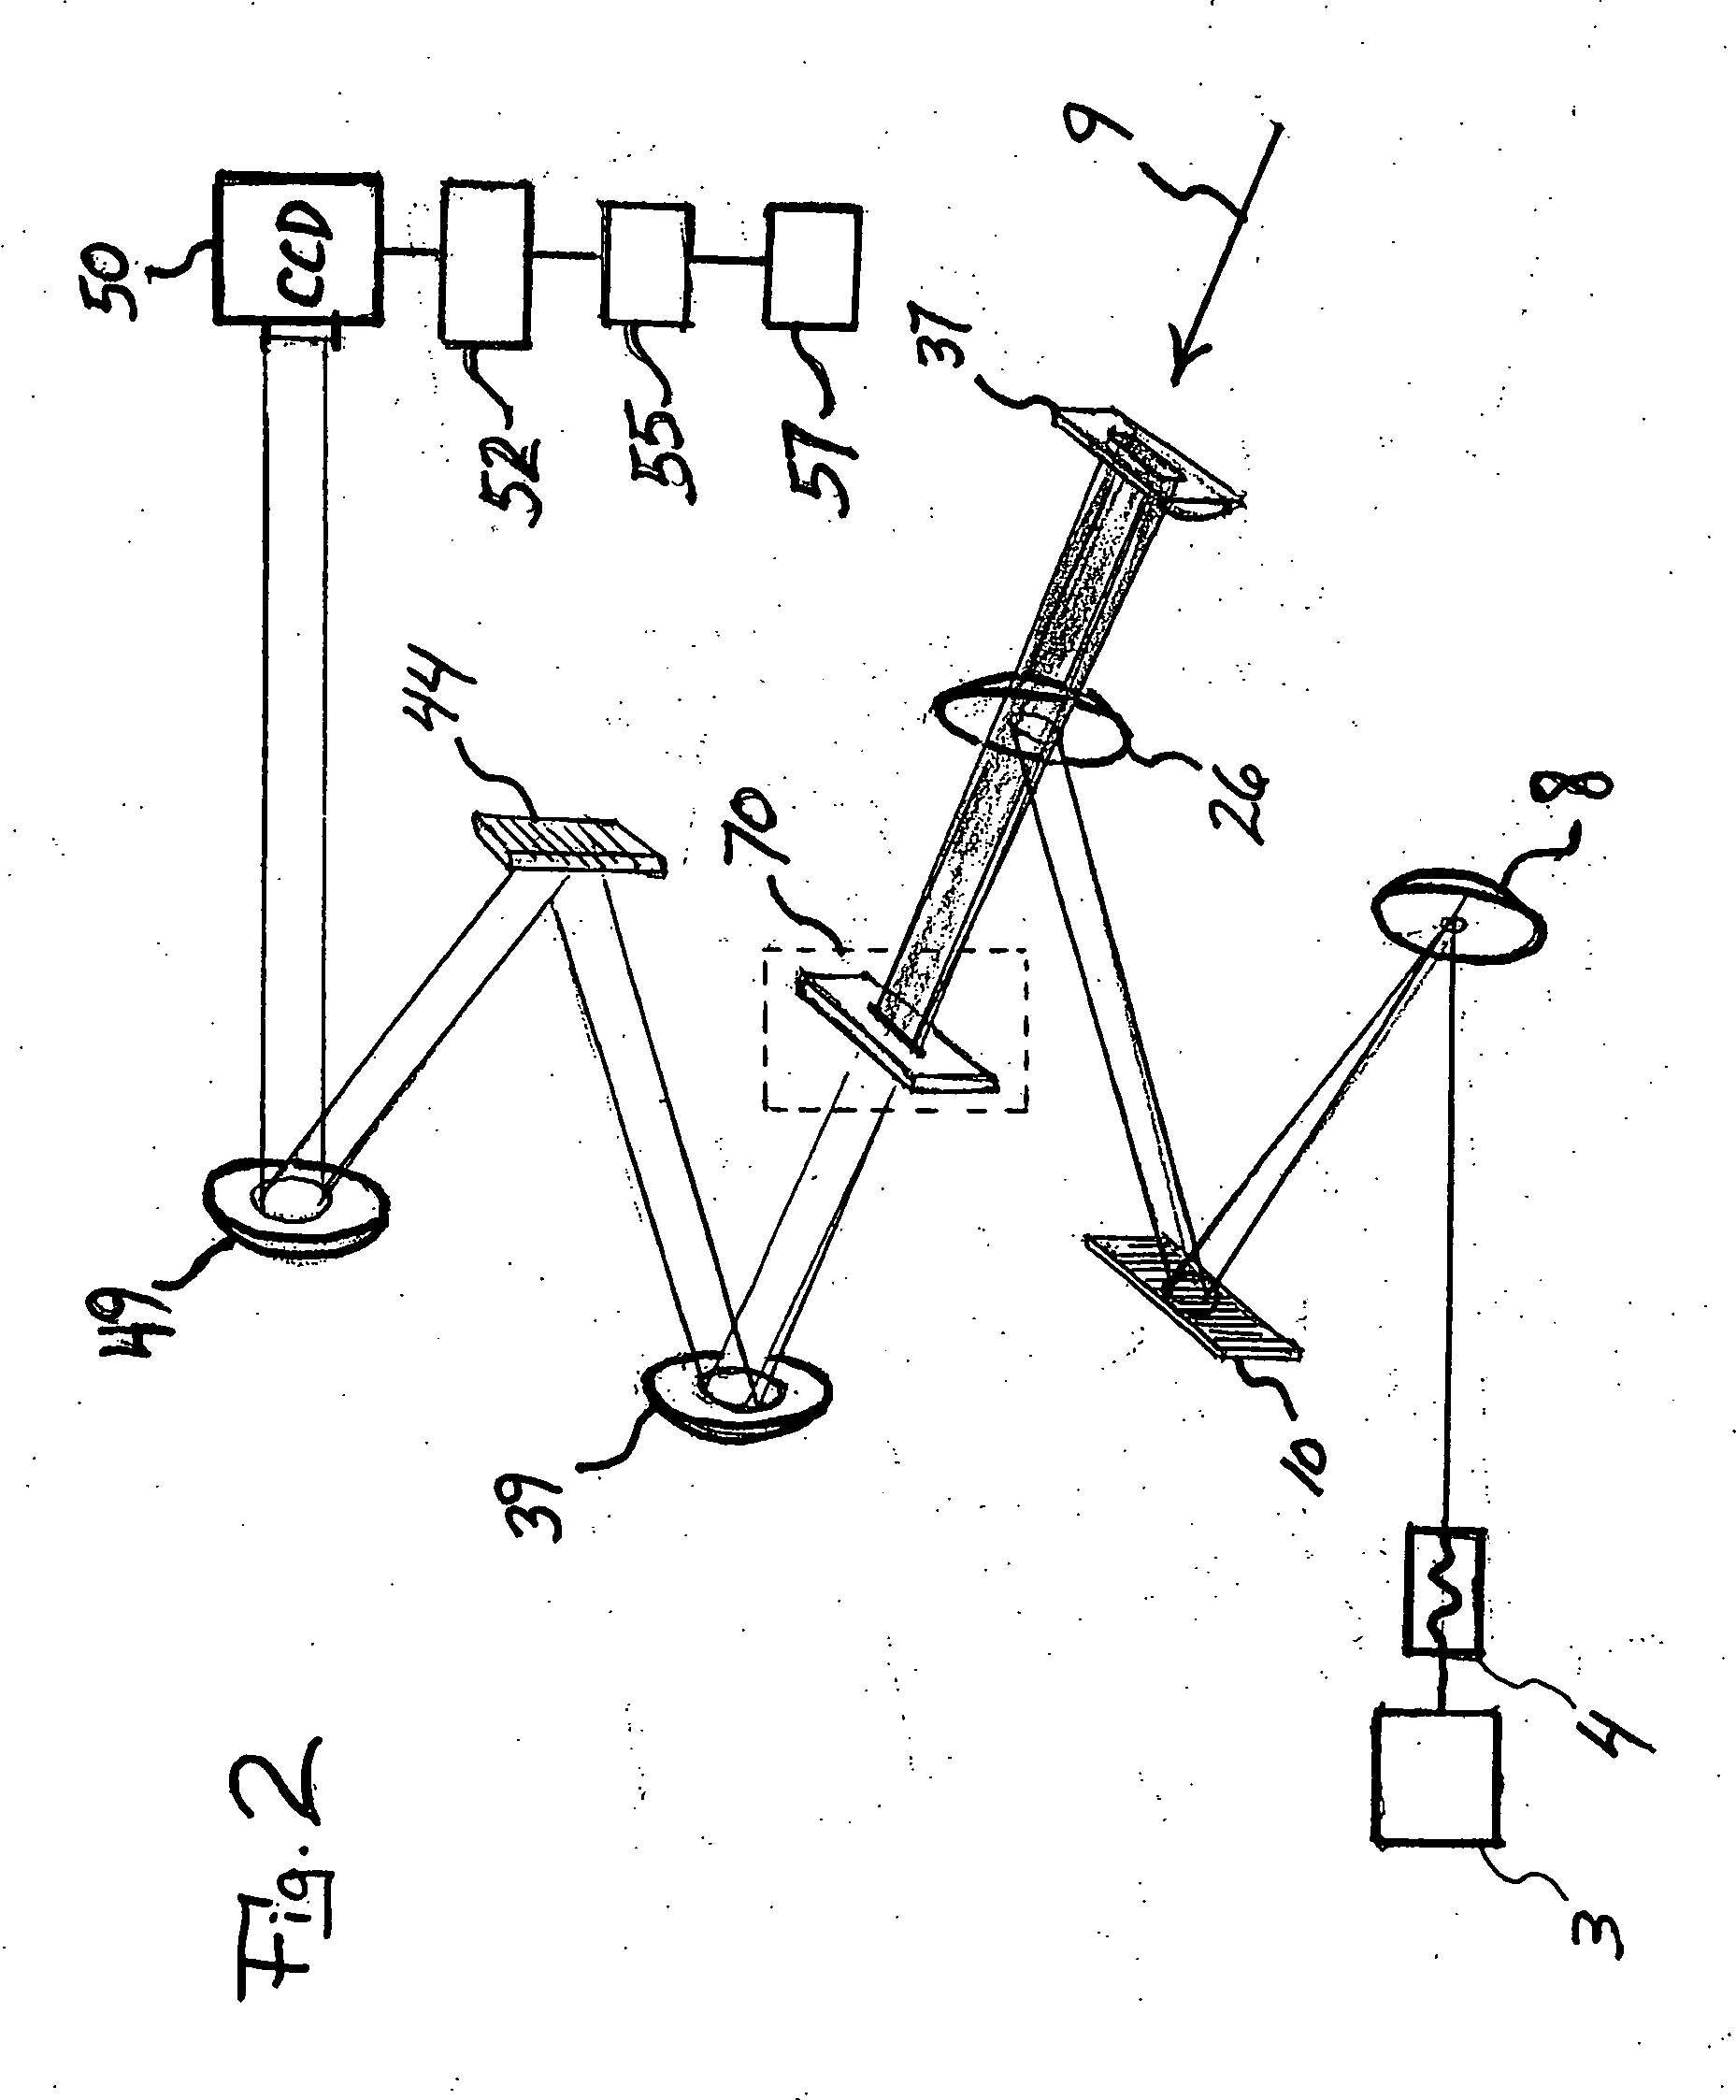 Method and apparatus for two-dimensional spectroscopy